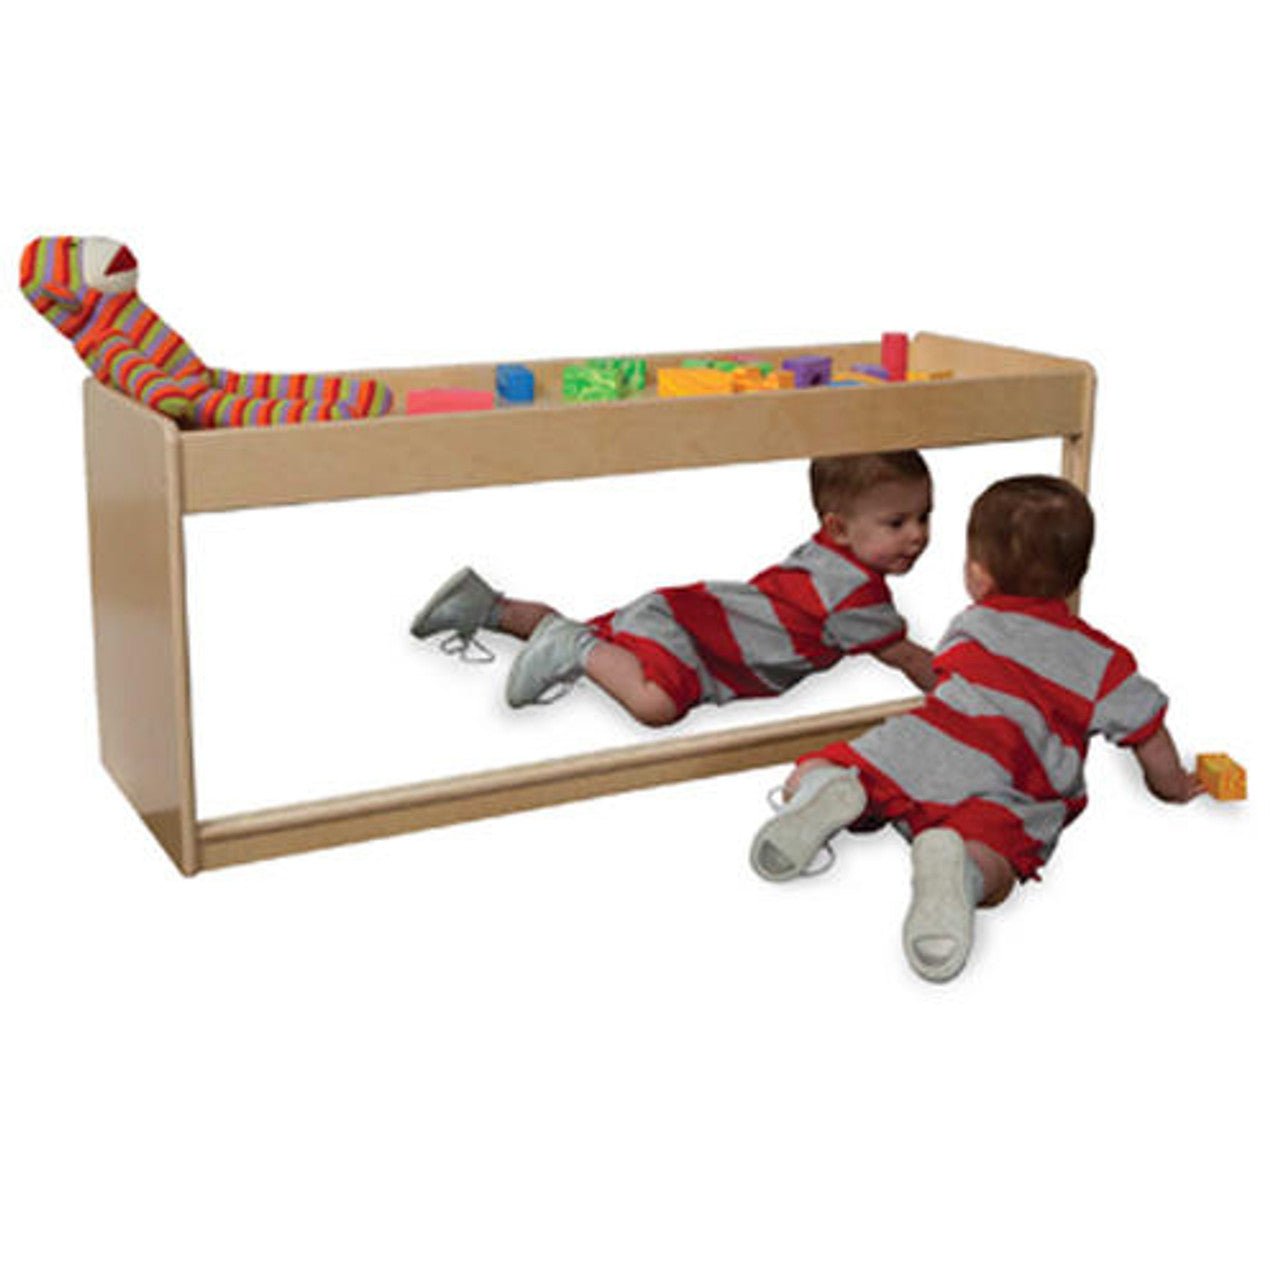 Wood Designs Infant Pull-Up Storage - 19"H x 48"W (WD40400) - SchoolOutlet